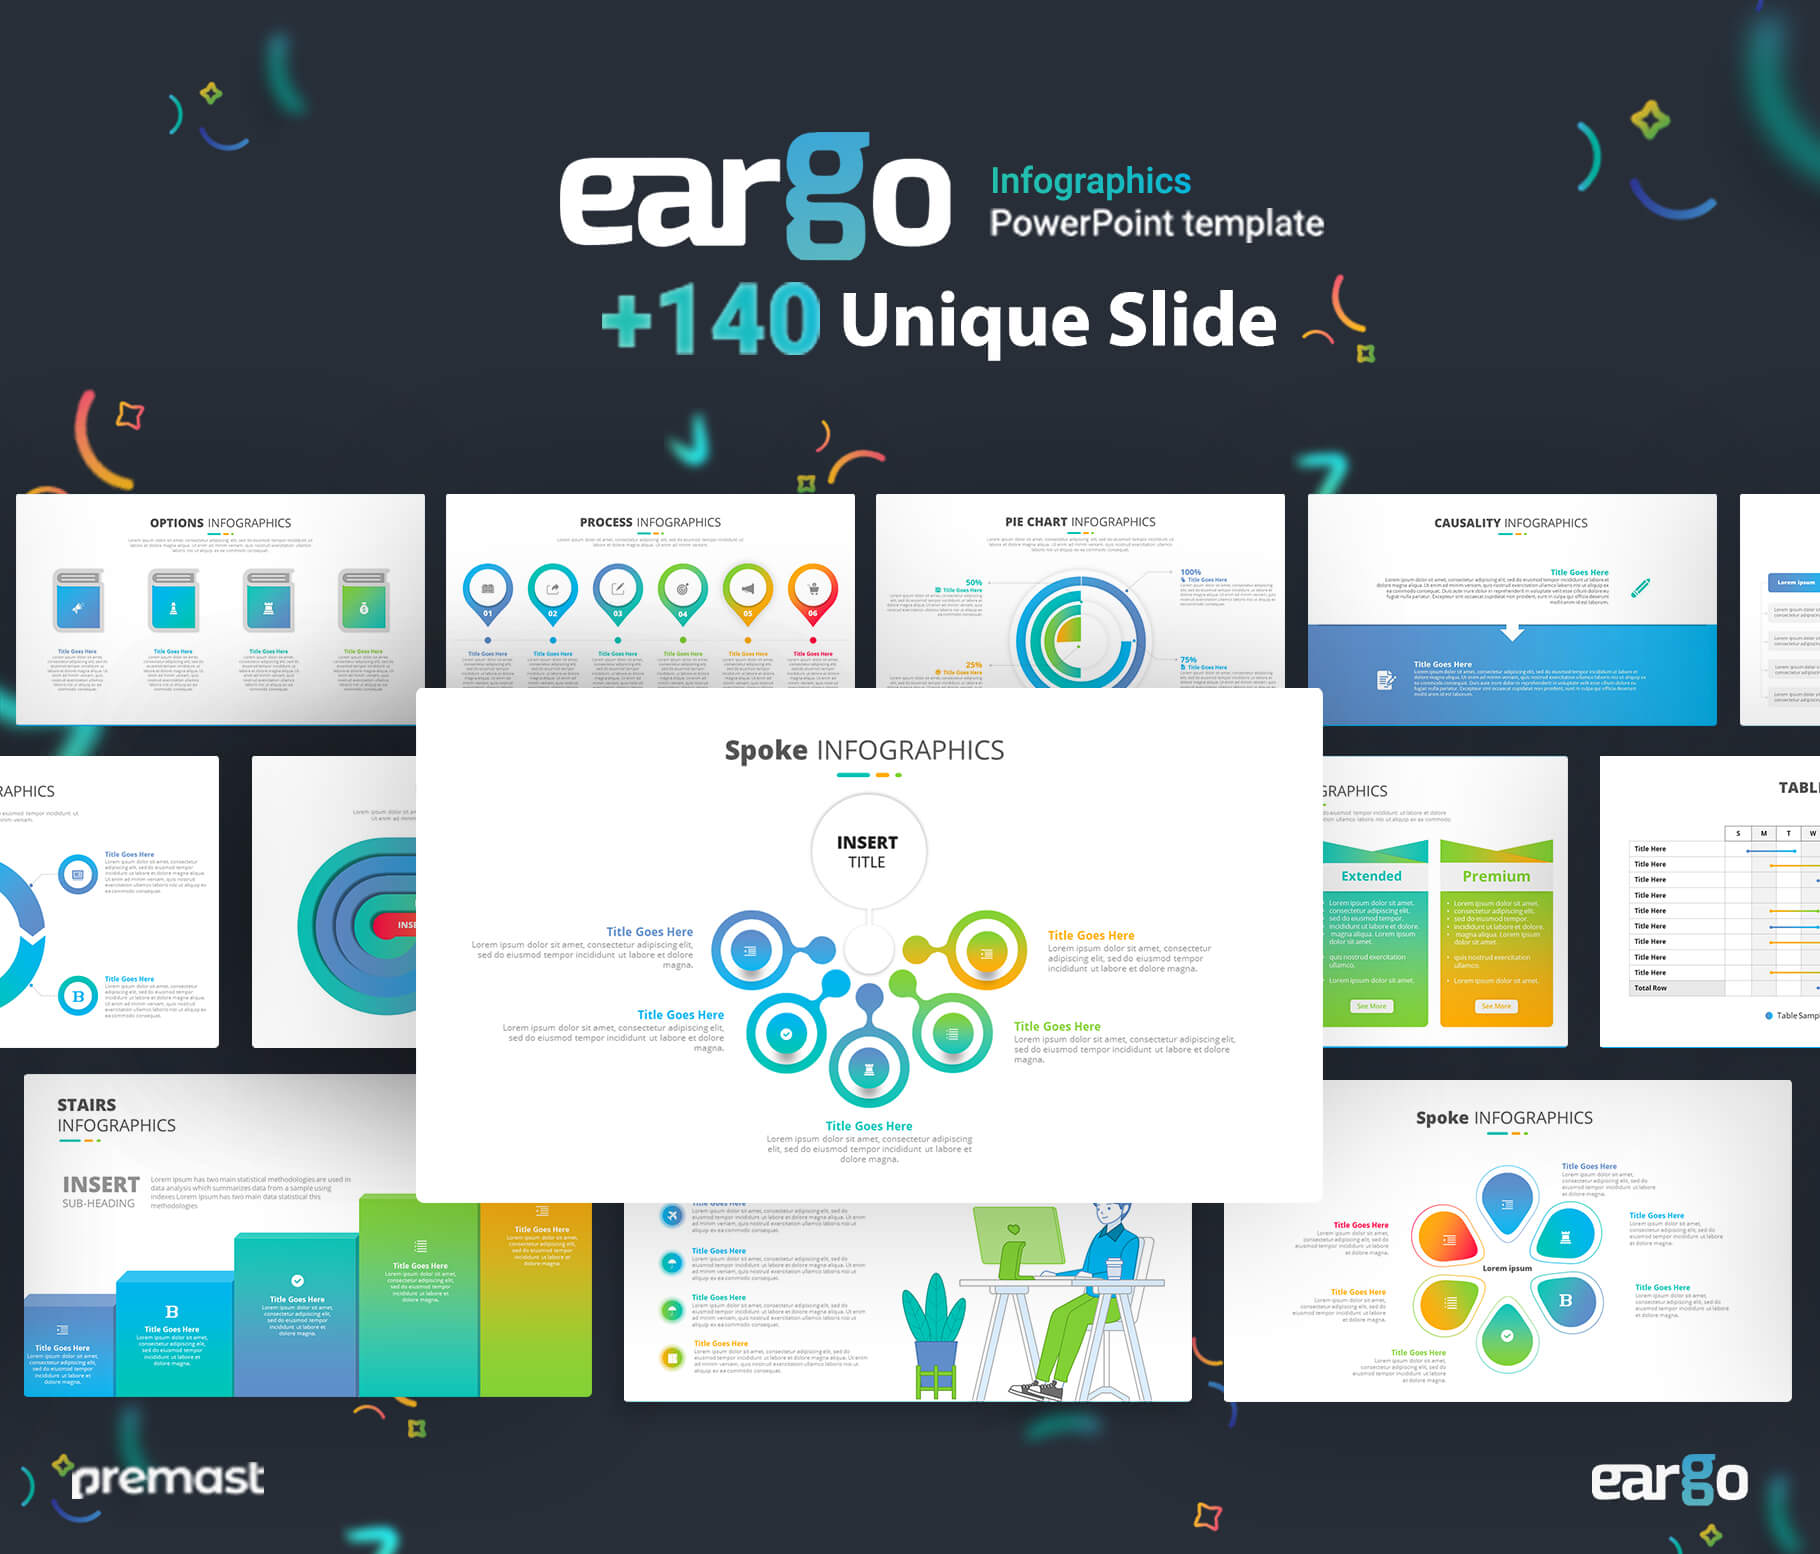 Eargo Infographics Powerpoint Template With 140 Unique Slides Pertaining To What Is Template In Powerpoint